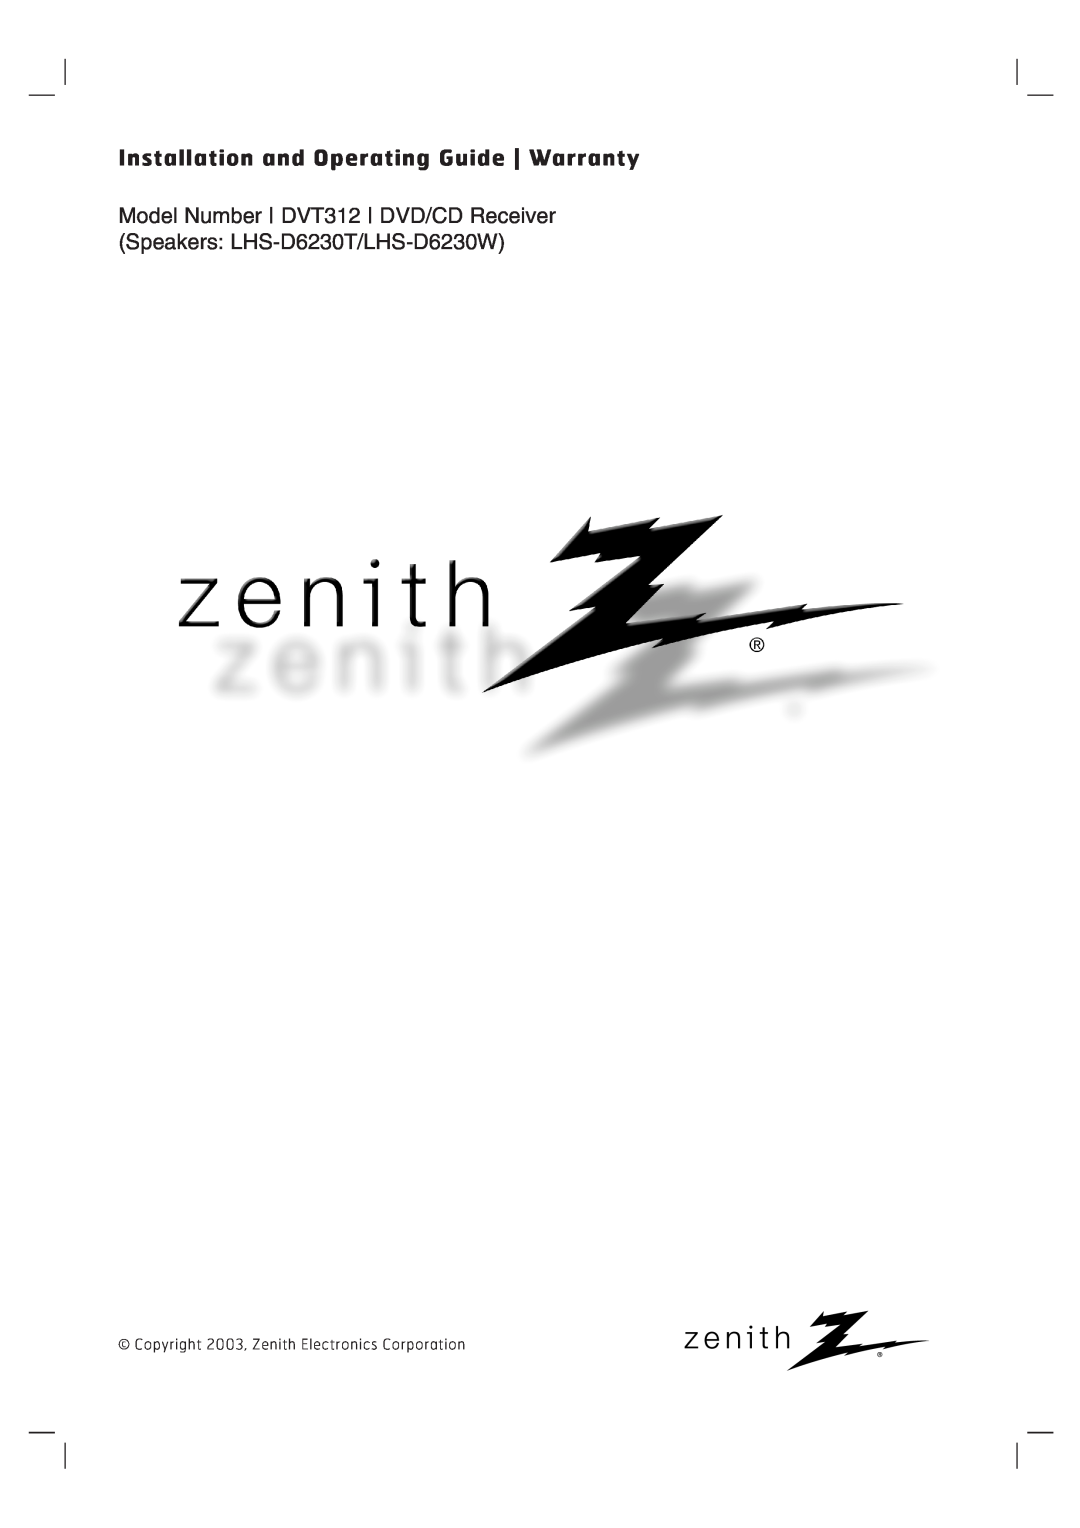 Zenith warranty Installation and Operating Guide Warranty, Model Number DVT312 DVD/CD Receiver 